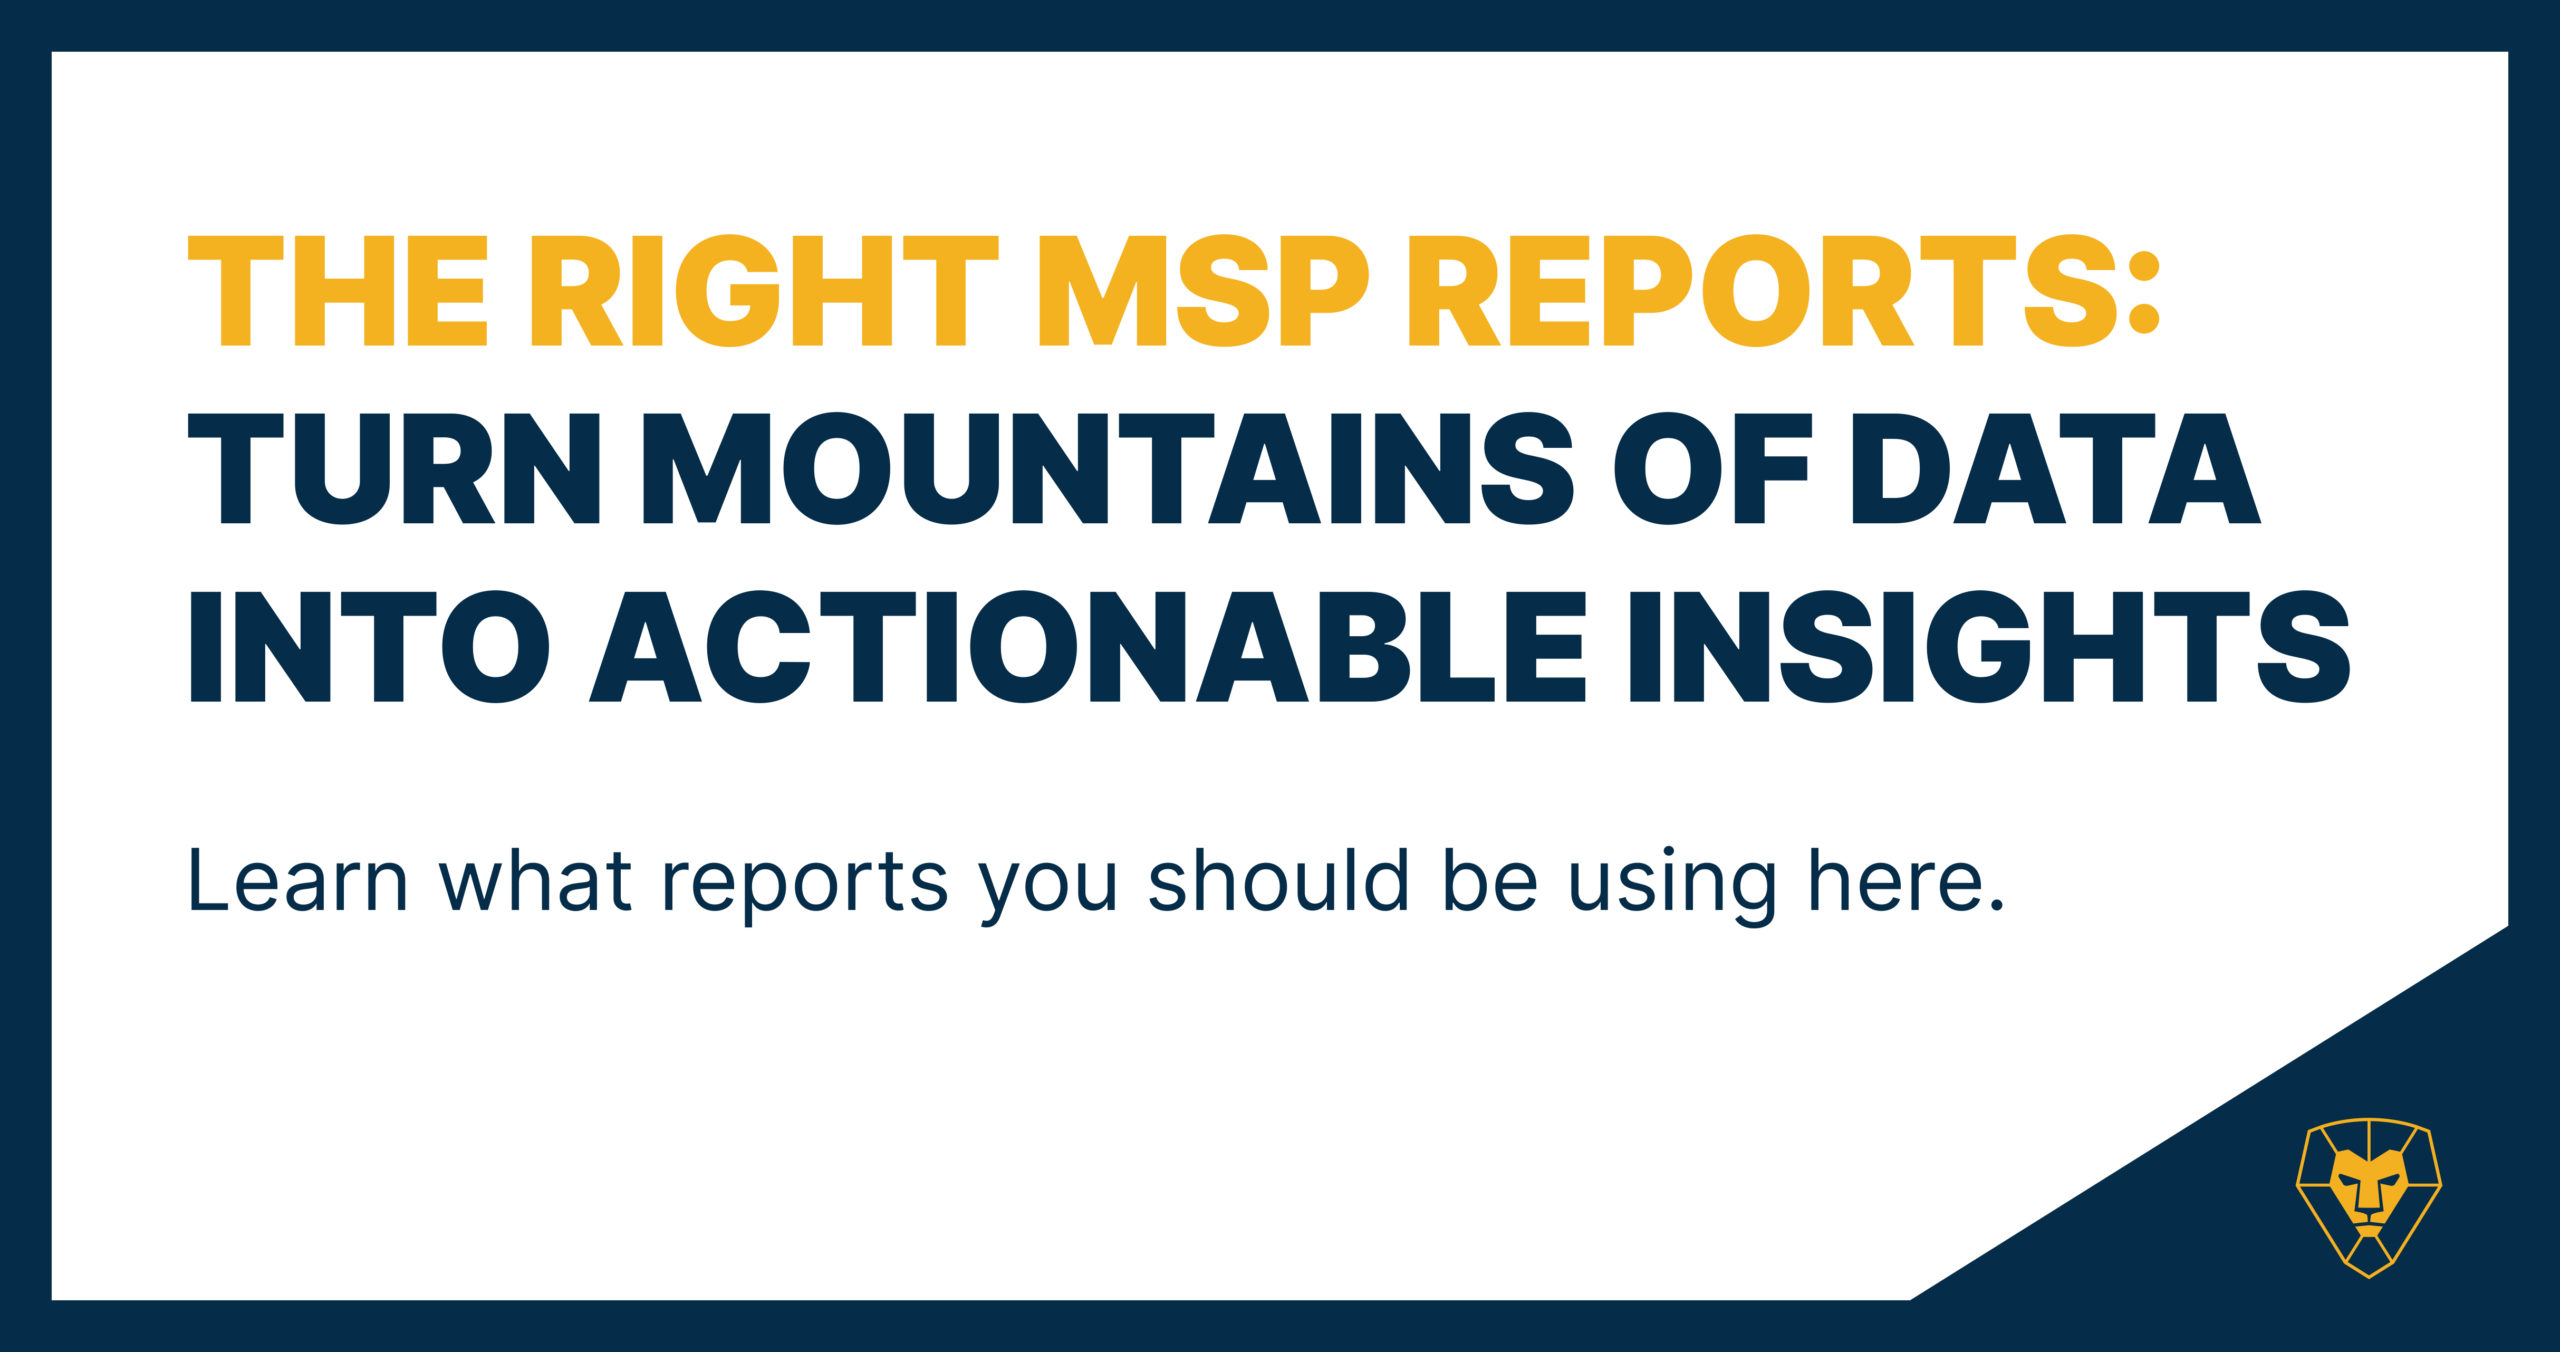 The Right Reports: Turn Mountains of Data into Actionable Insights